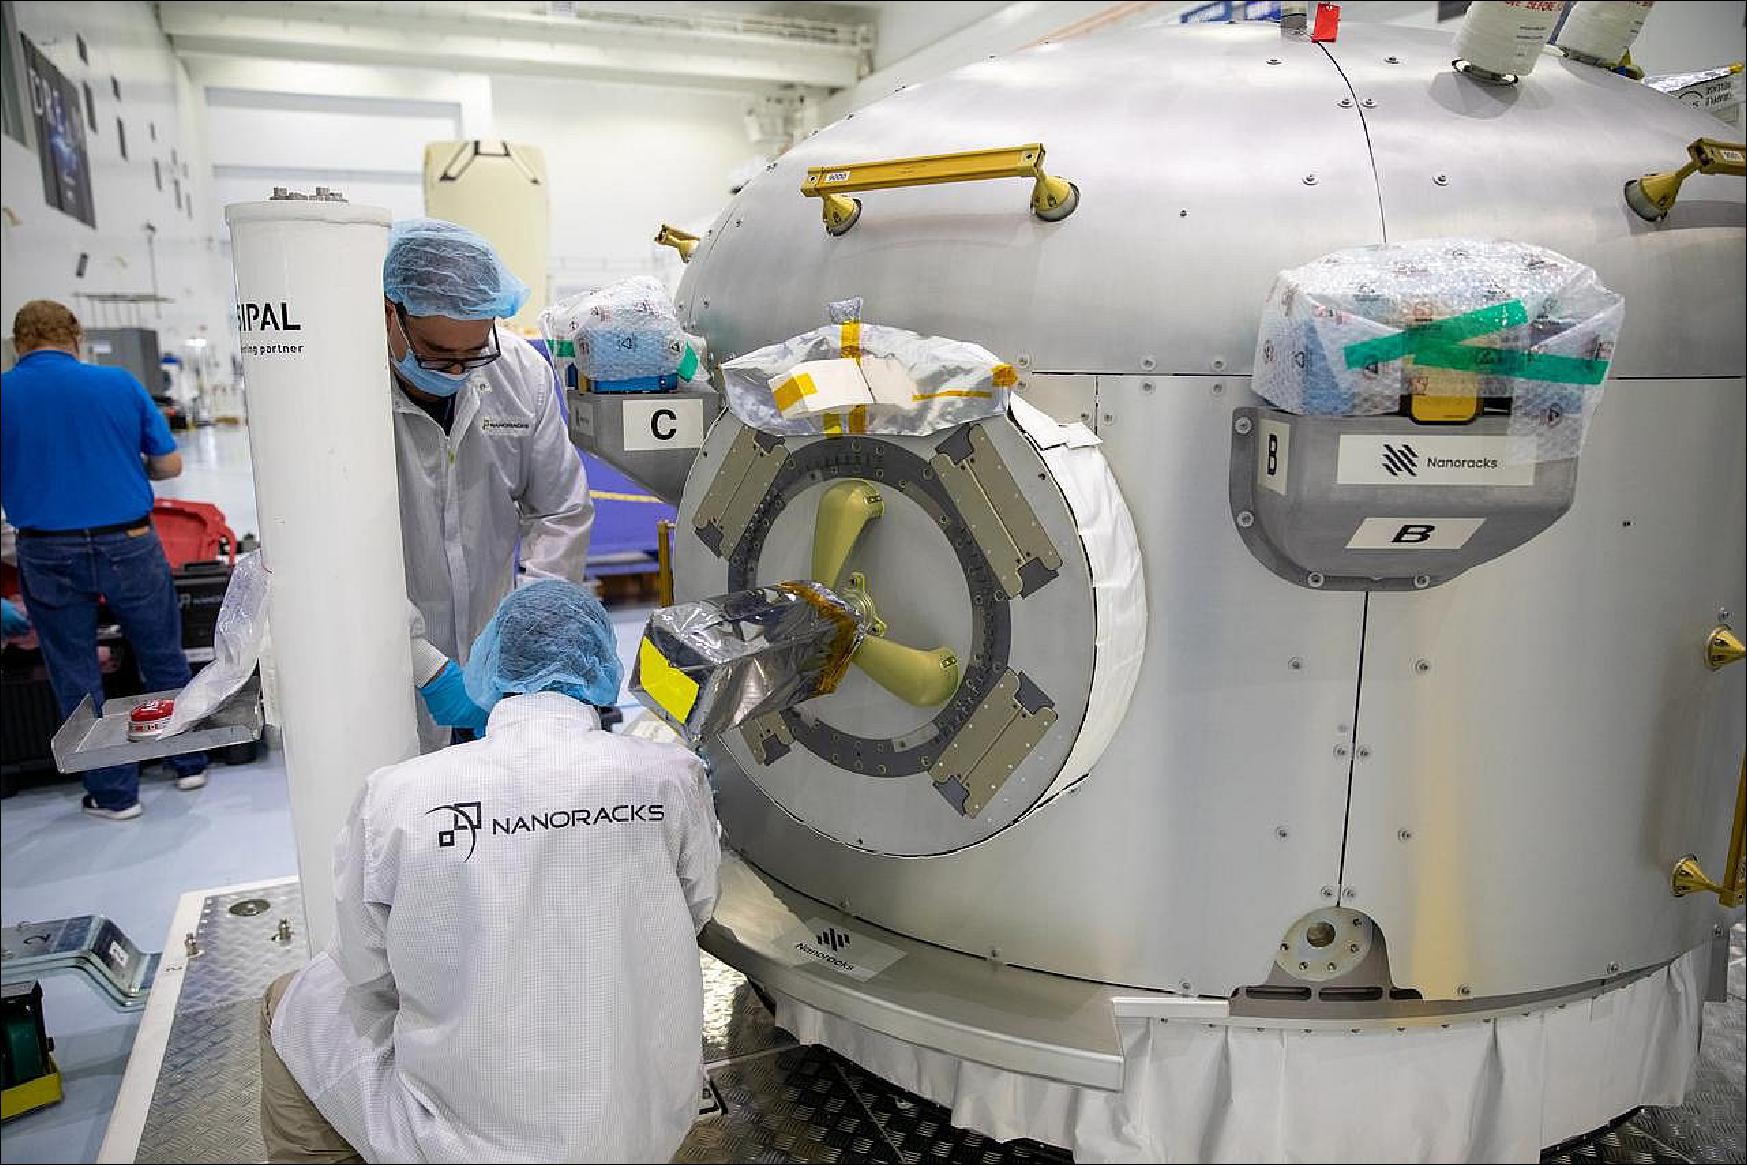 Figure 6: The NanoRacks Team prepares the Bishop Airlock for final inspections at NASA’s Kennedy Space Center’s Space Station Processing Facility (SSPF) in October, 2020 (image credit: NanoRacks)